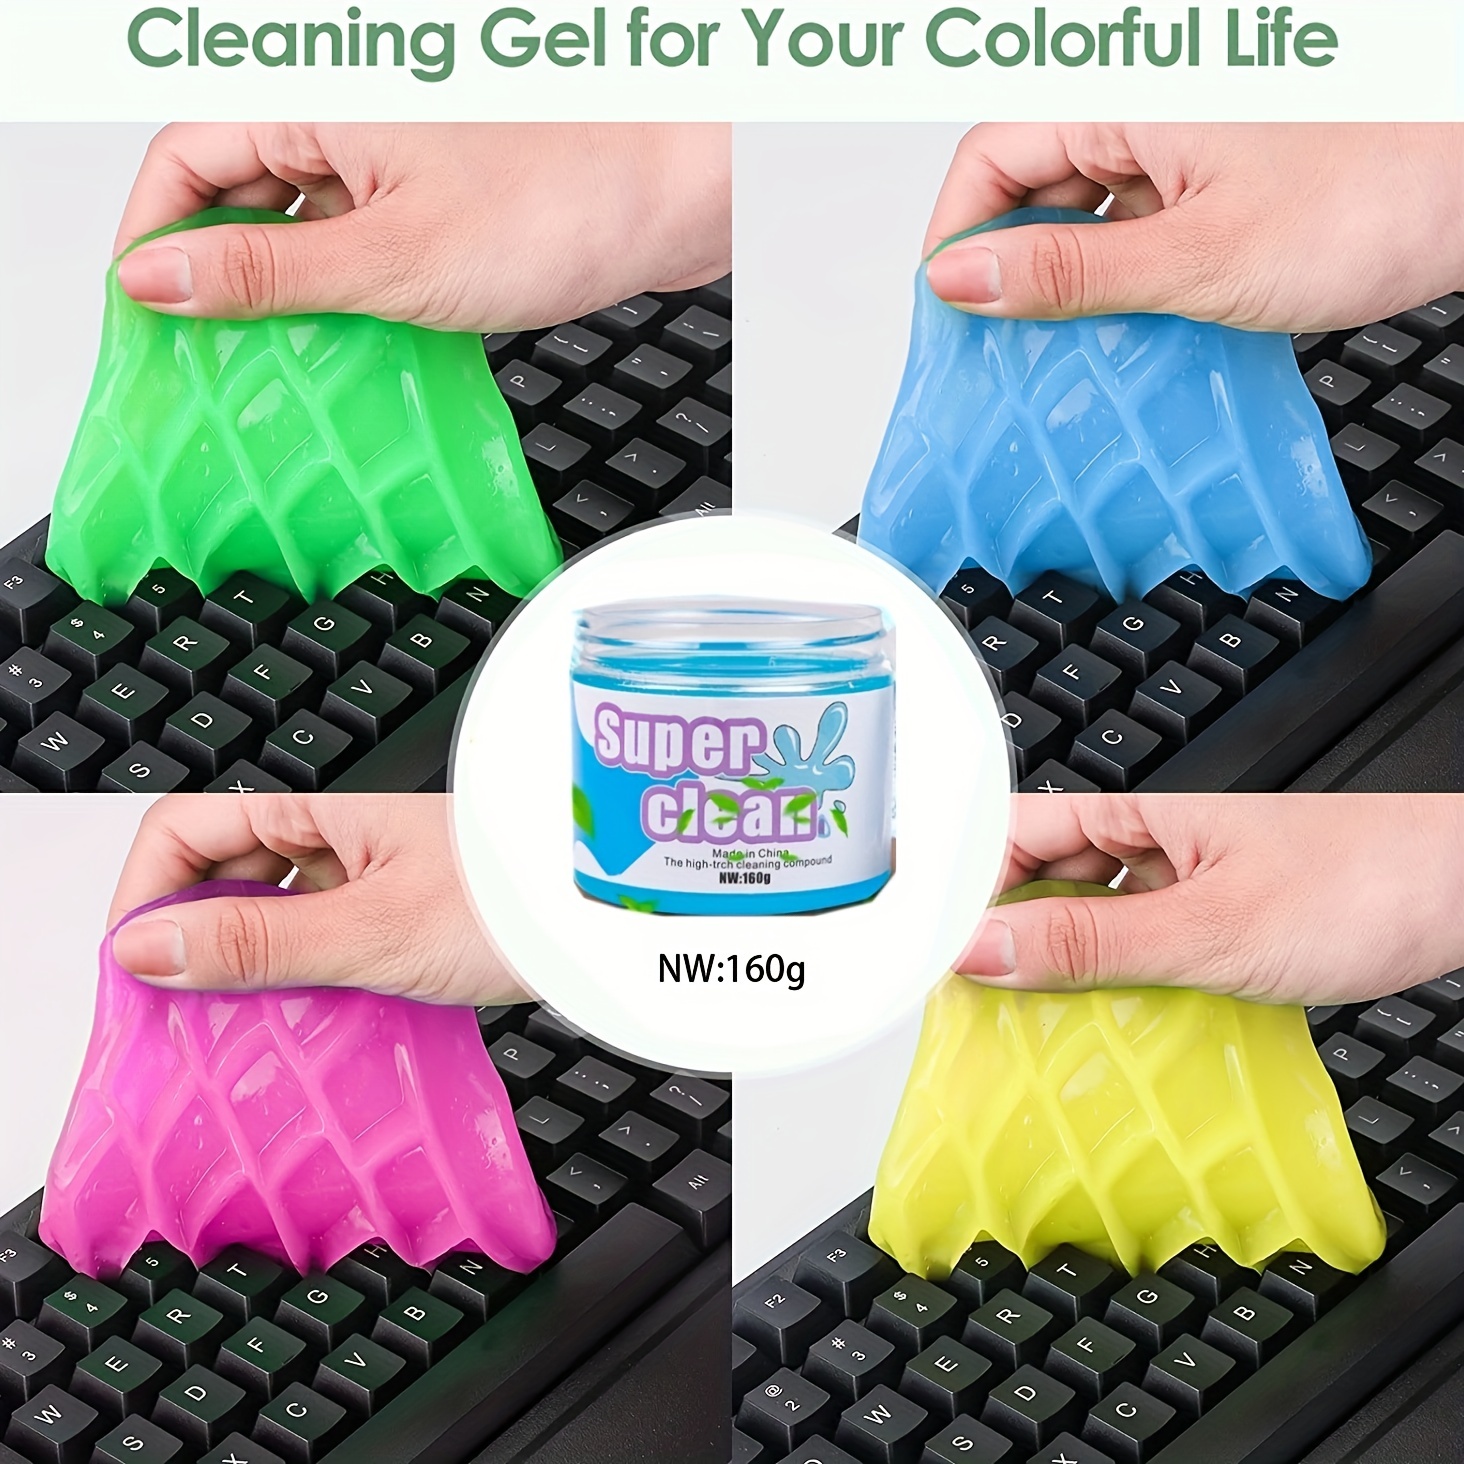 Looking to avoid] keyboard cleaning gel goo goop Silly Putty gummy